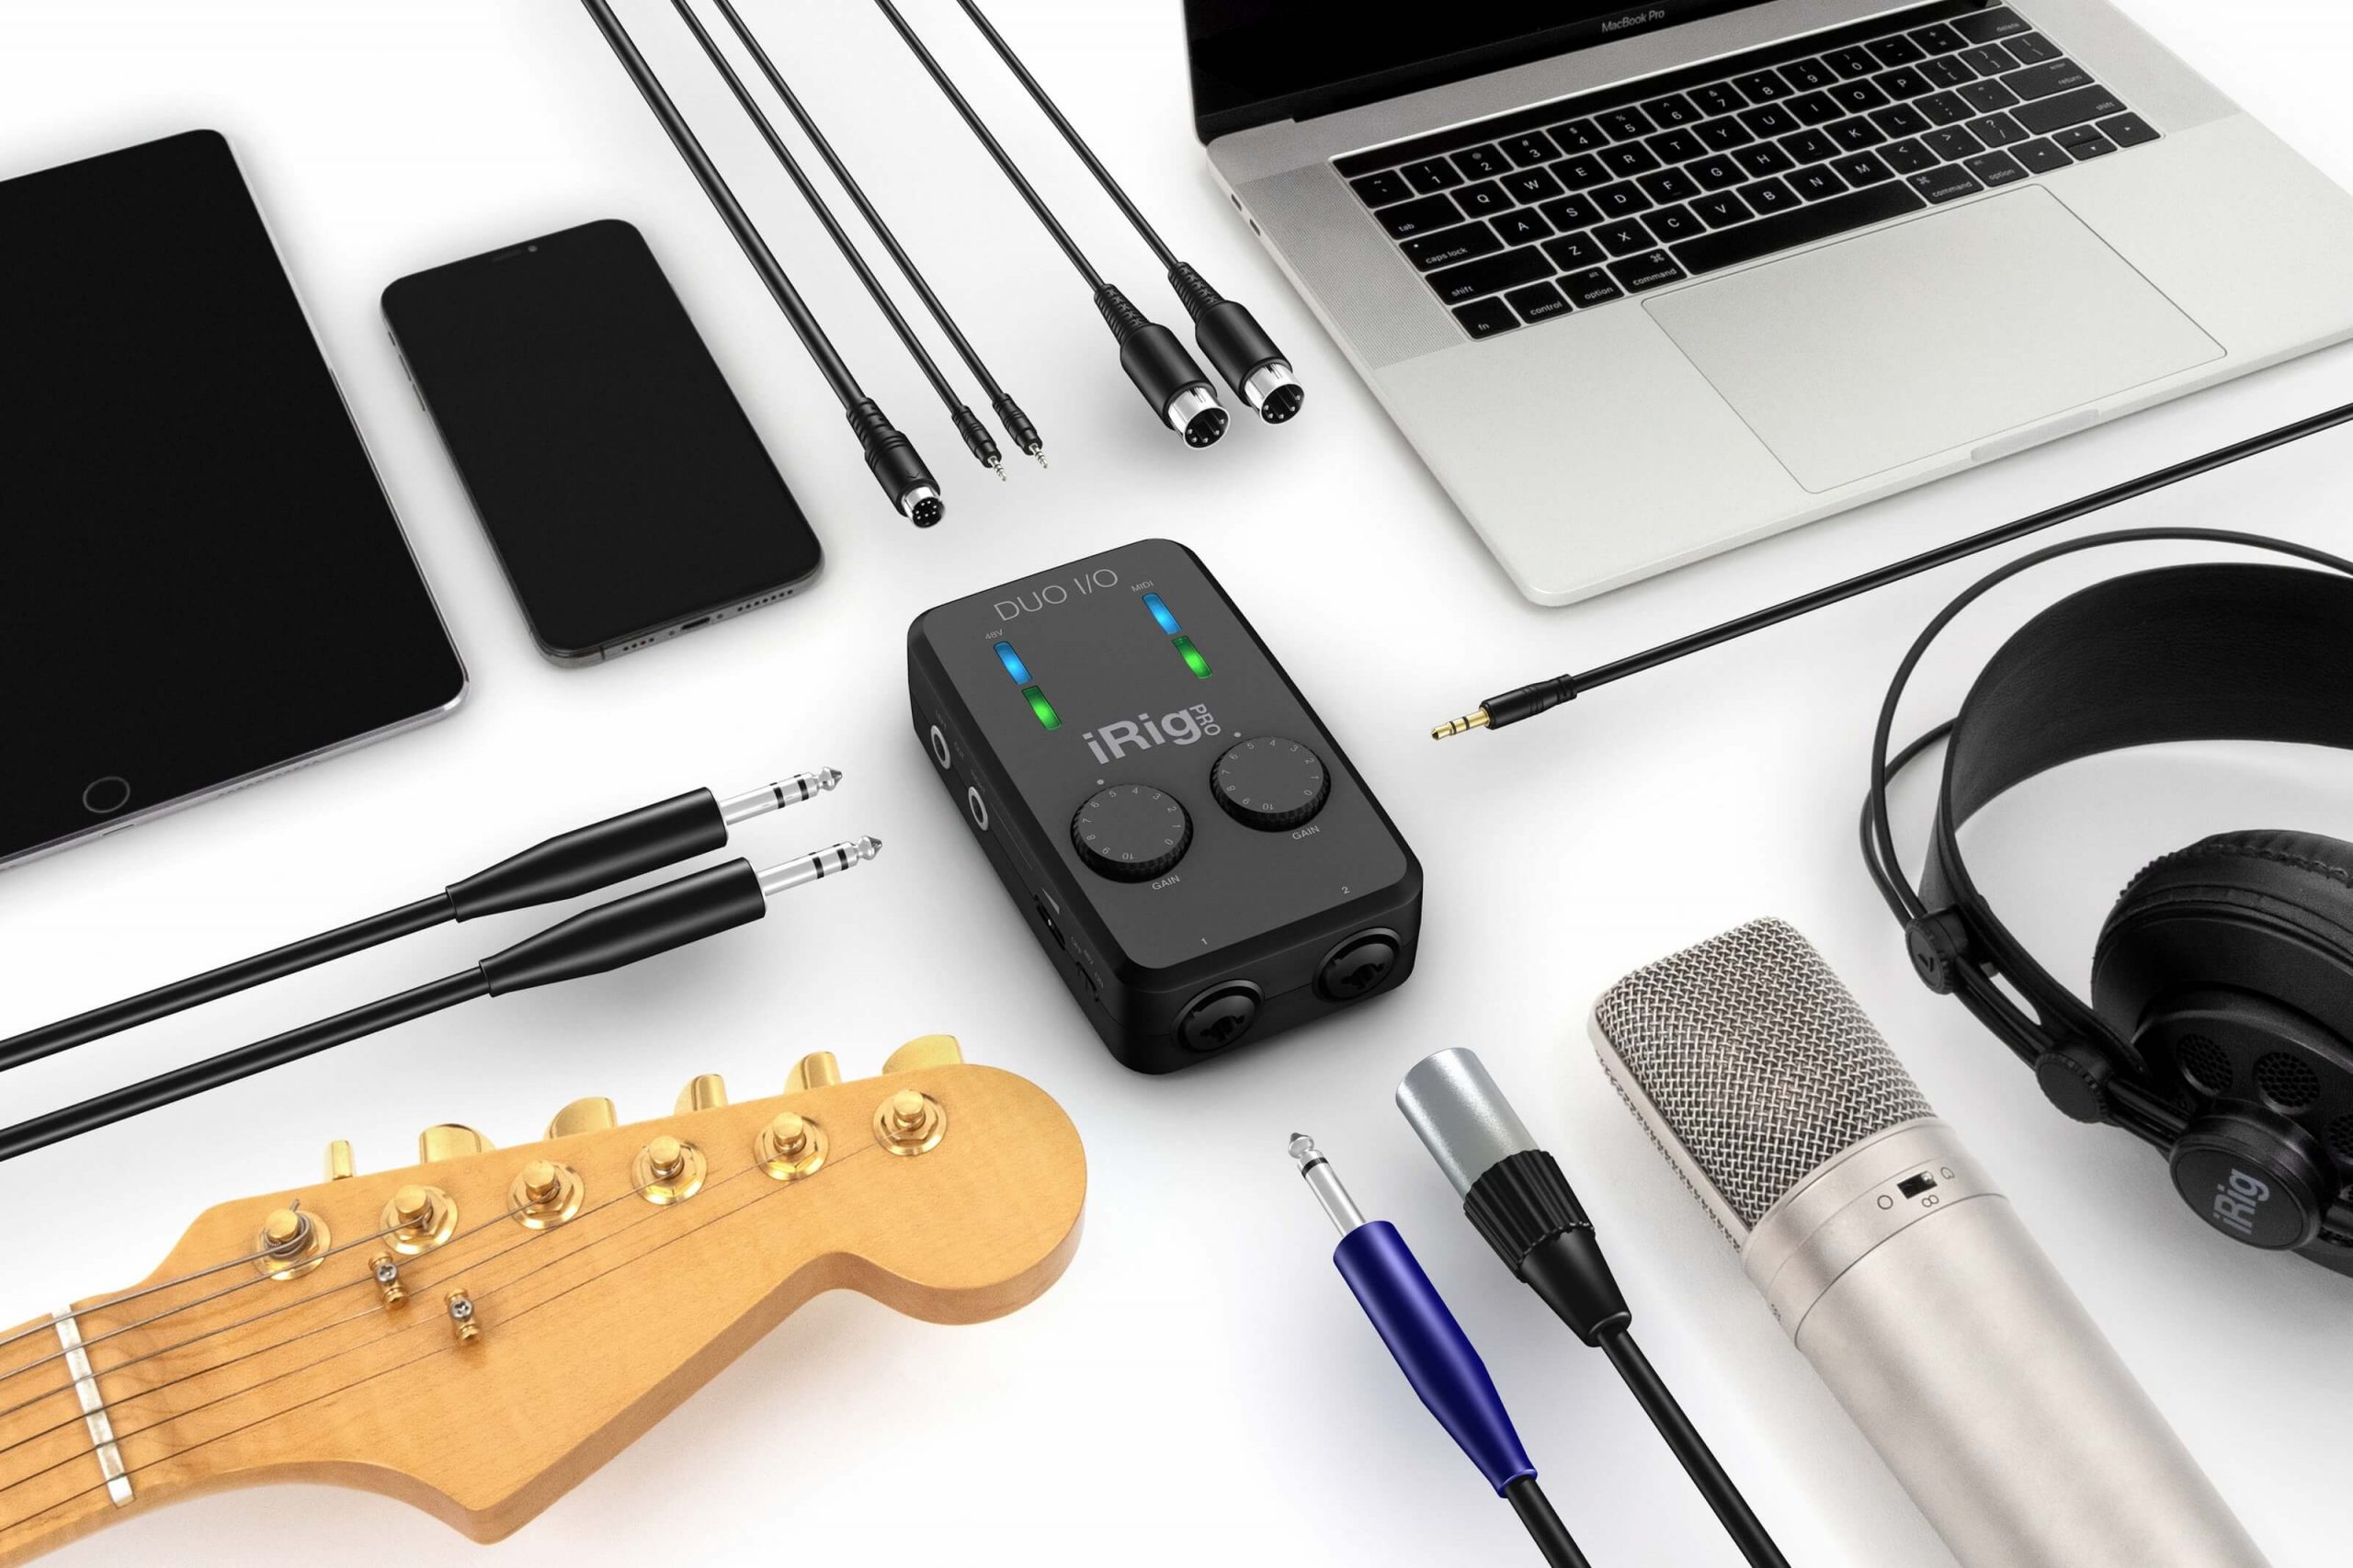 iRig Pro Duo I/O audio interface adds dedicated Windows drivers and more